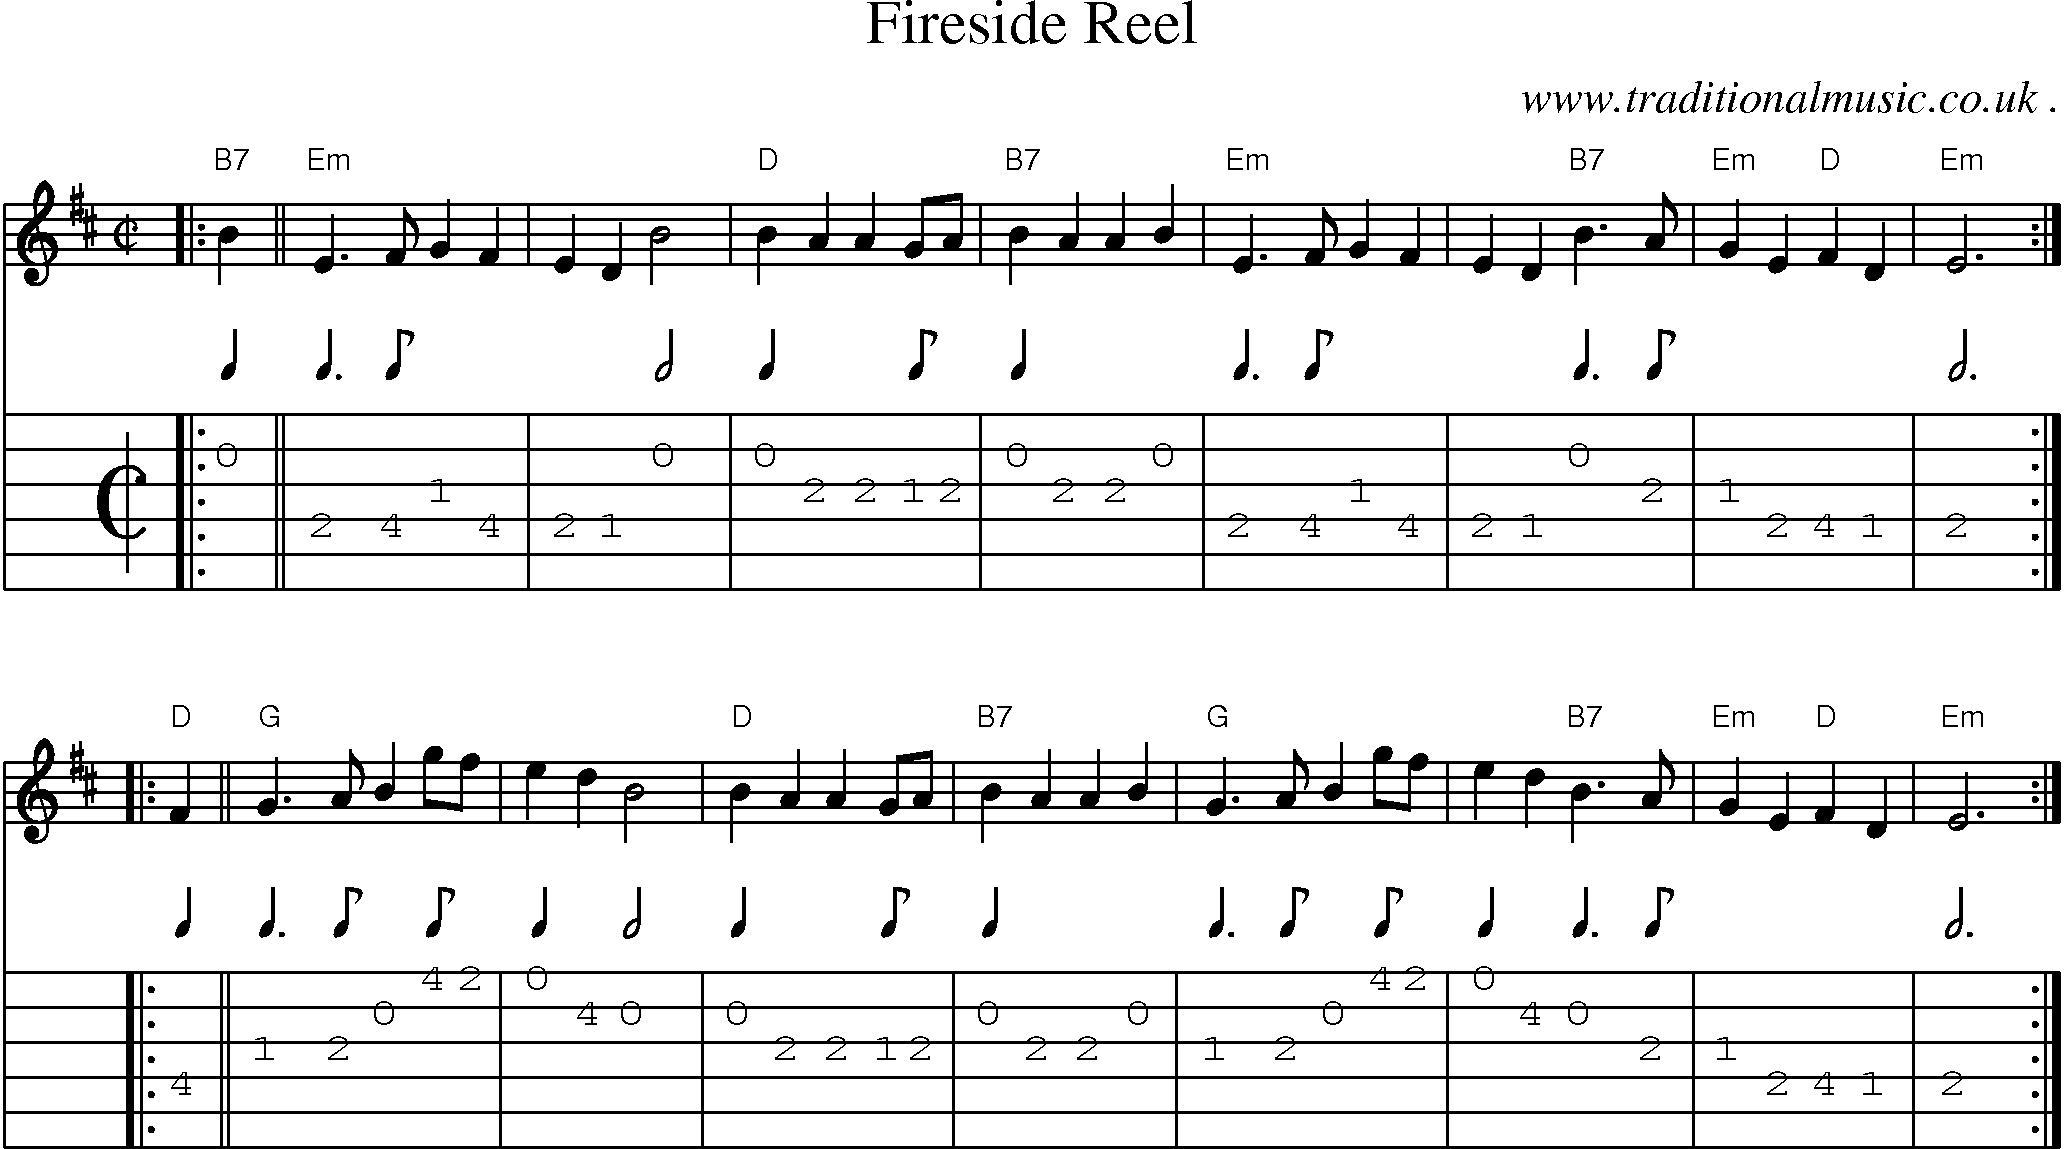 Sheet-music  score, Chords and Guitar Tabs for Fireside Reel